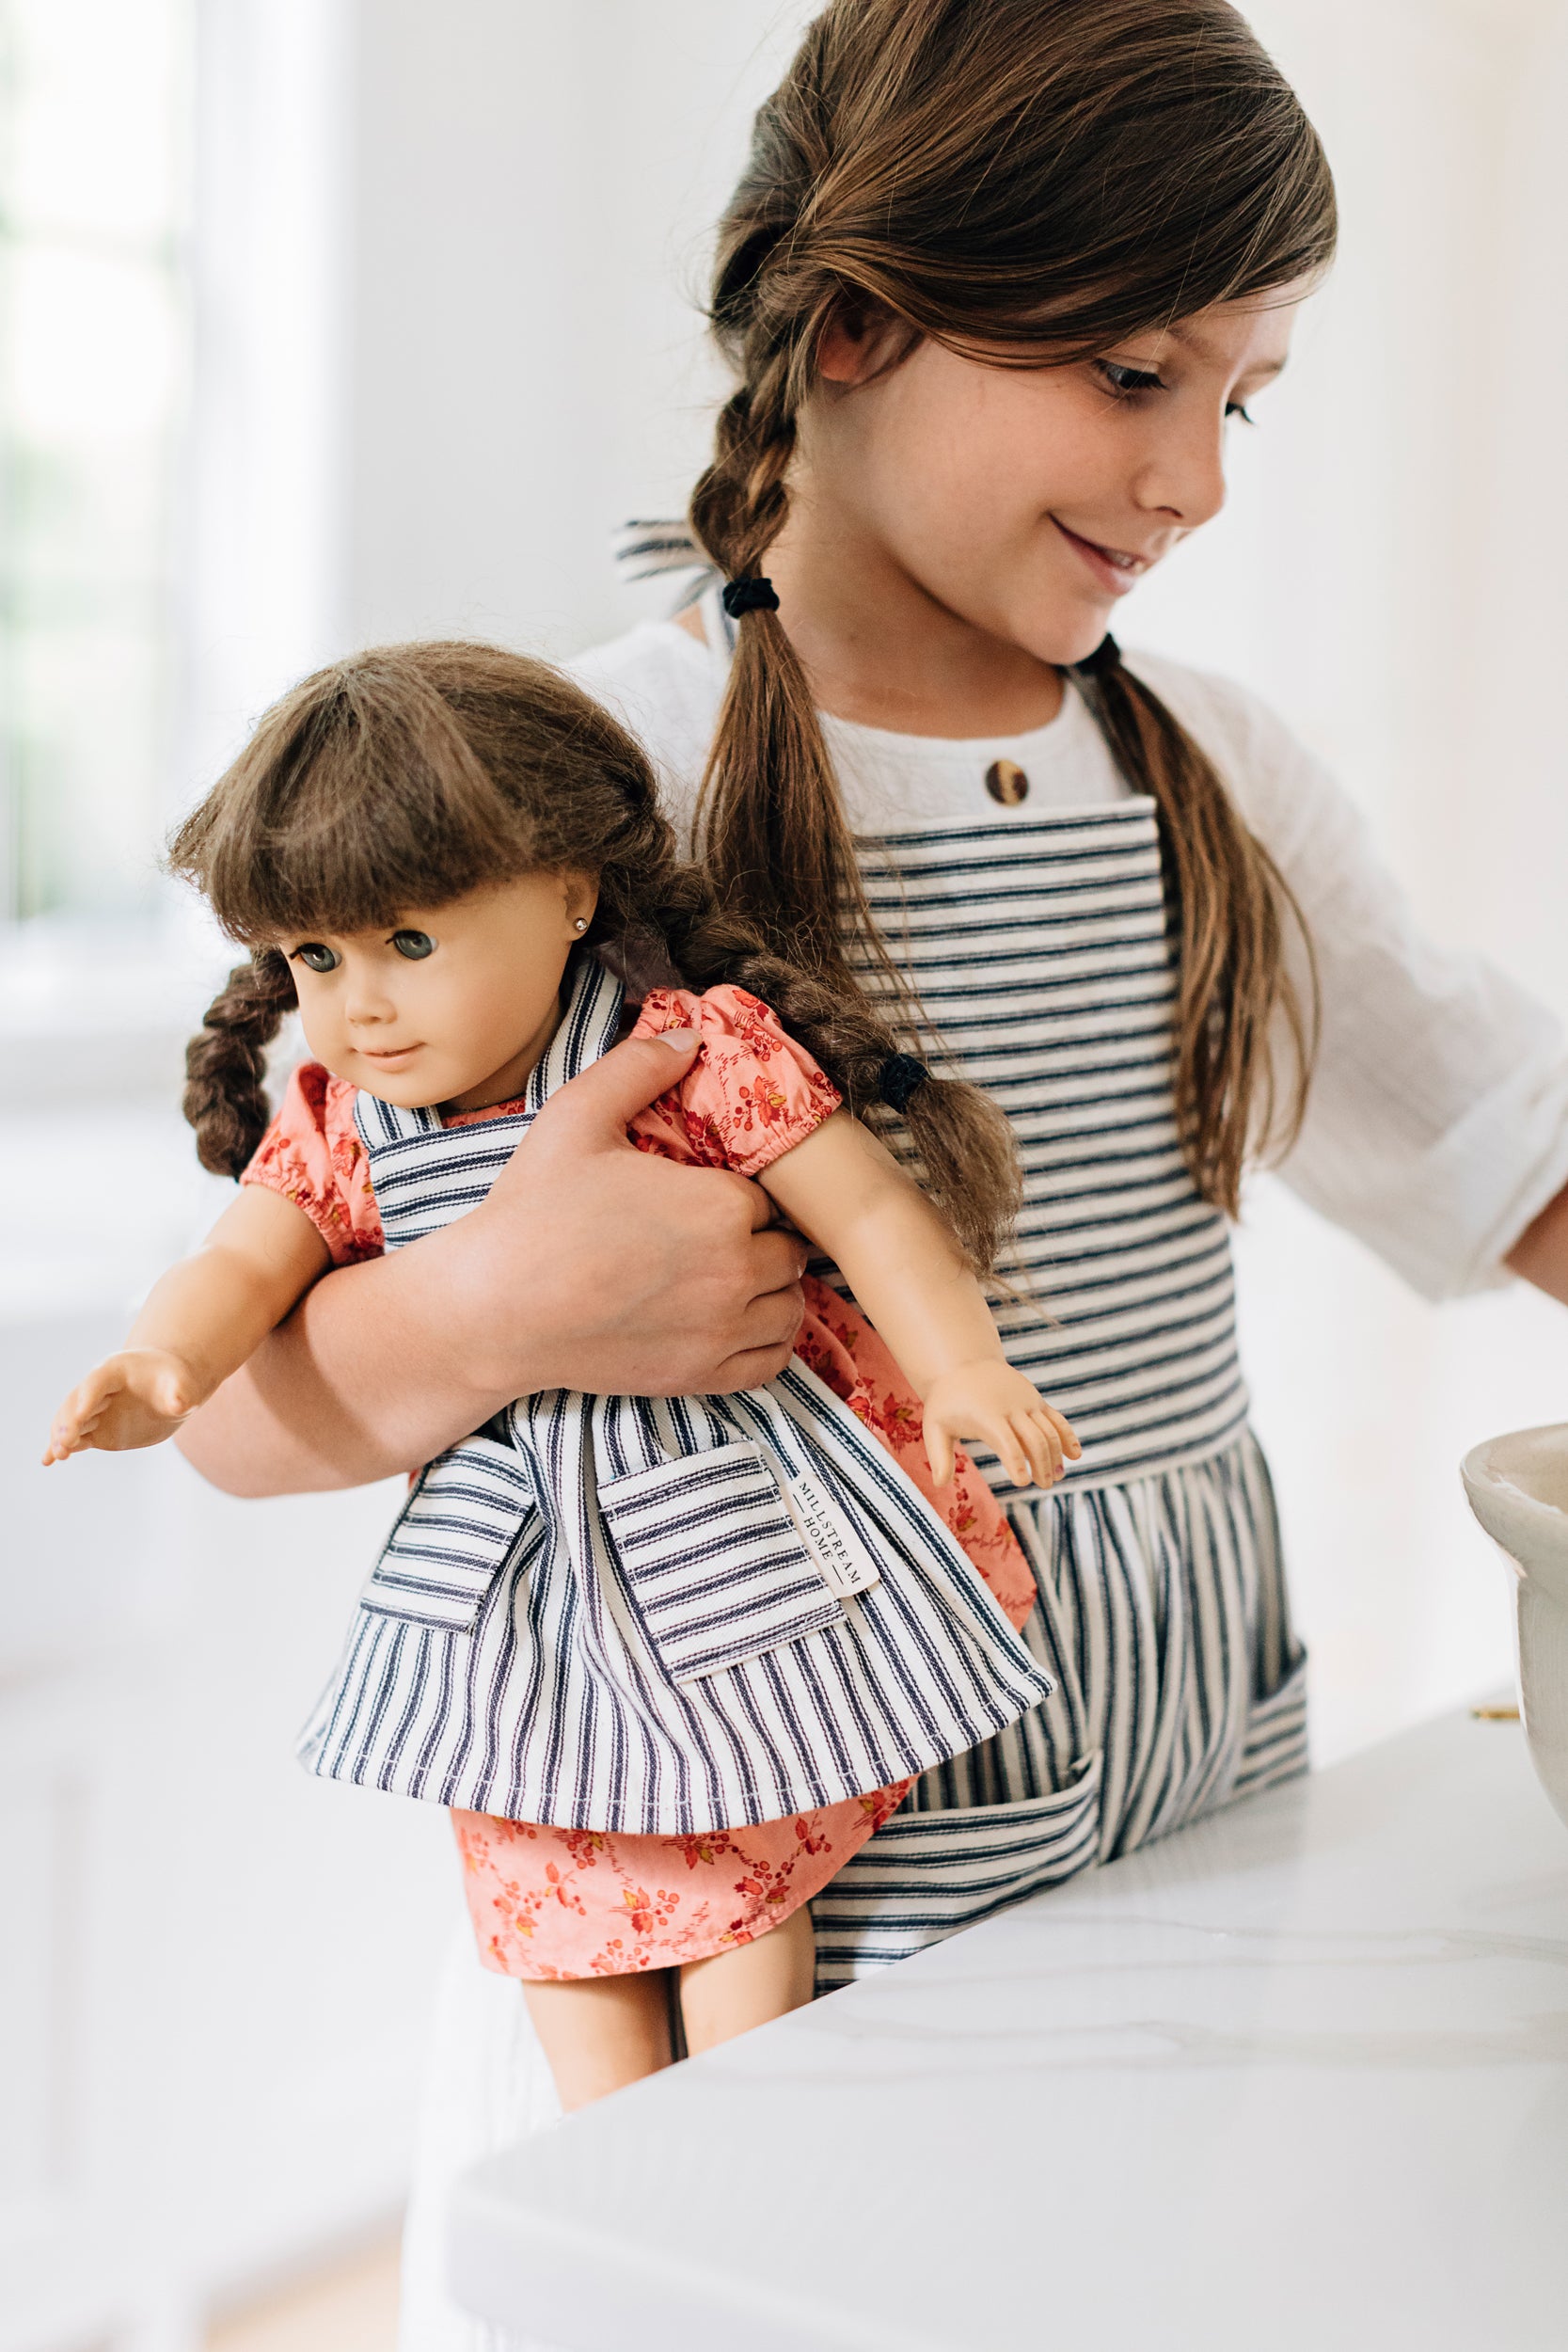 Child and Doll Wearing Matching Aprons